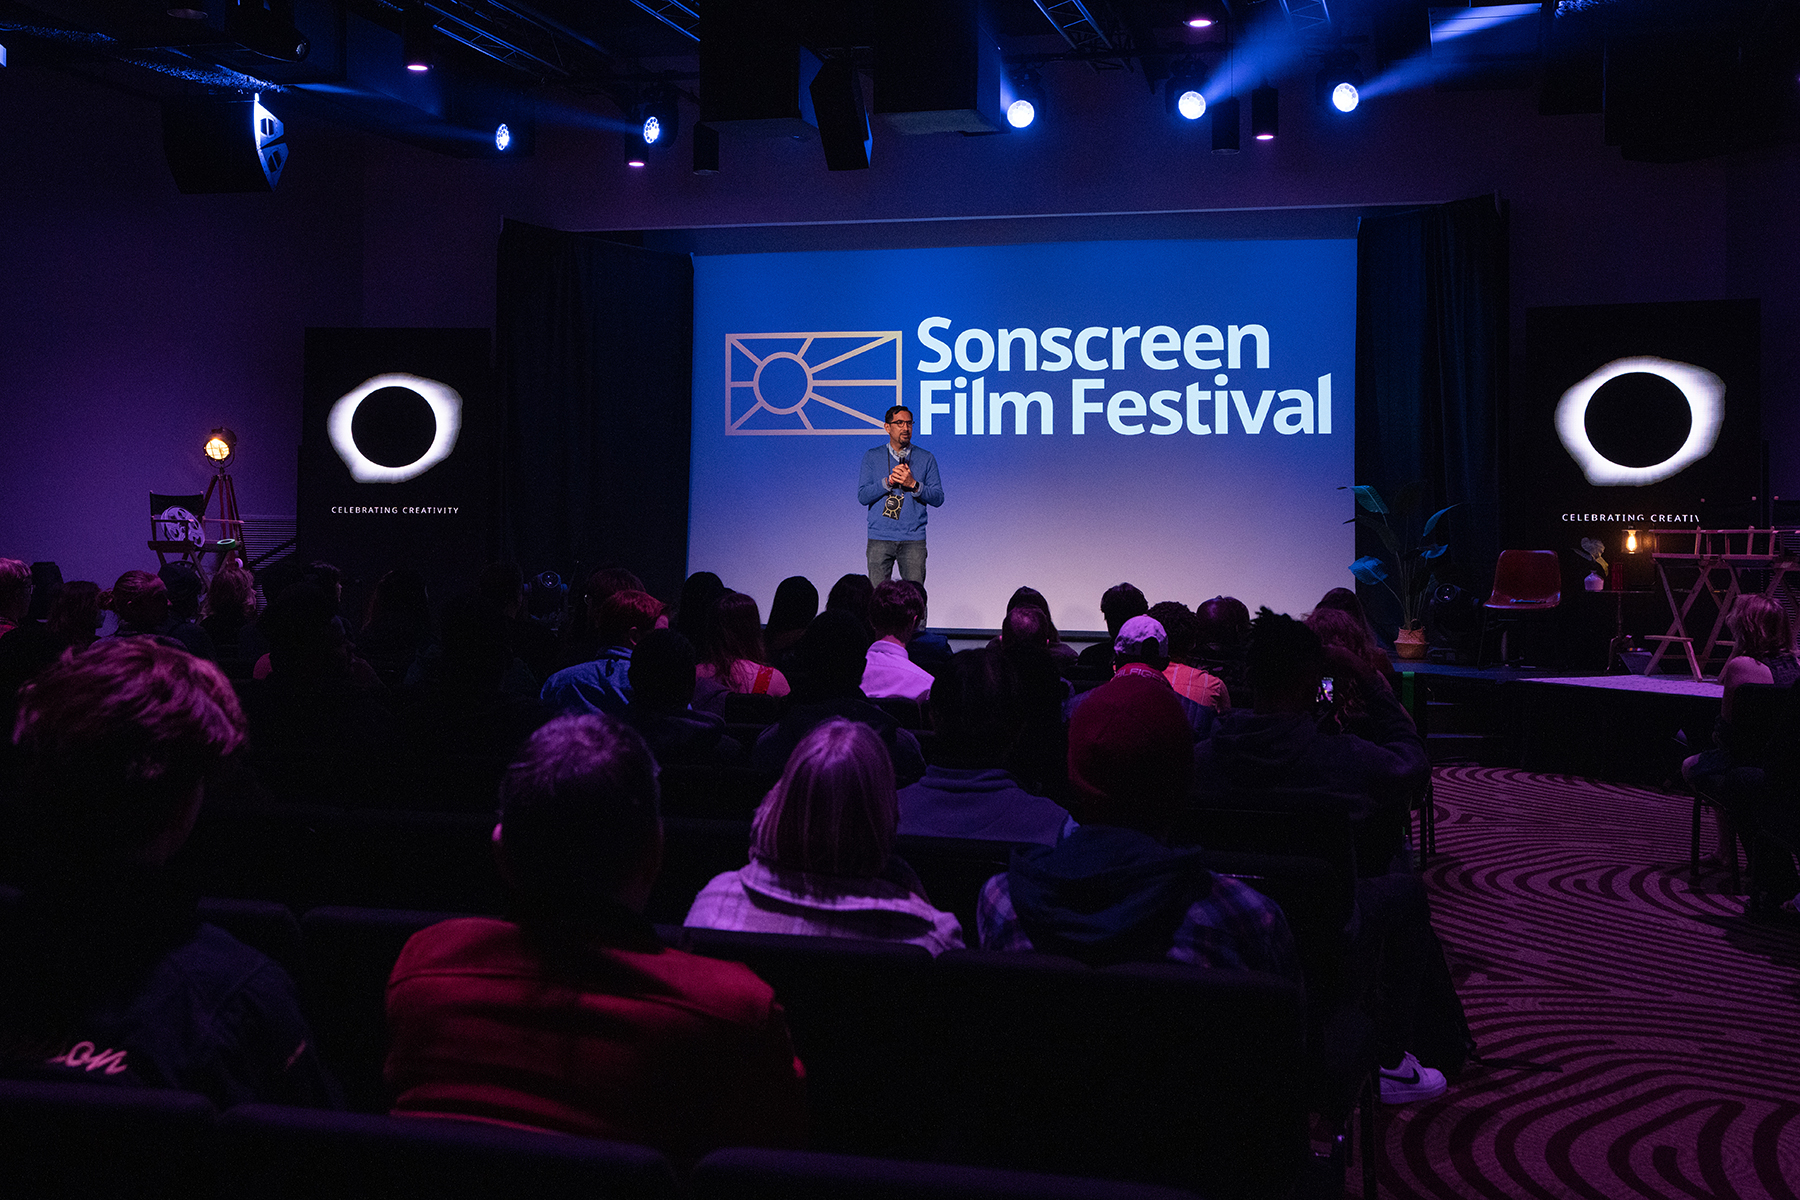 A Hispanic man stands in front of a screen reading "Sonscreen Film Festival." An audience can faintly be seen in a darkened room.